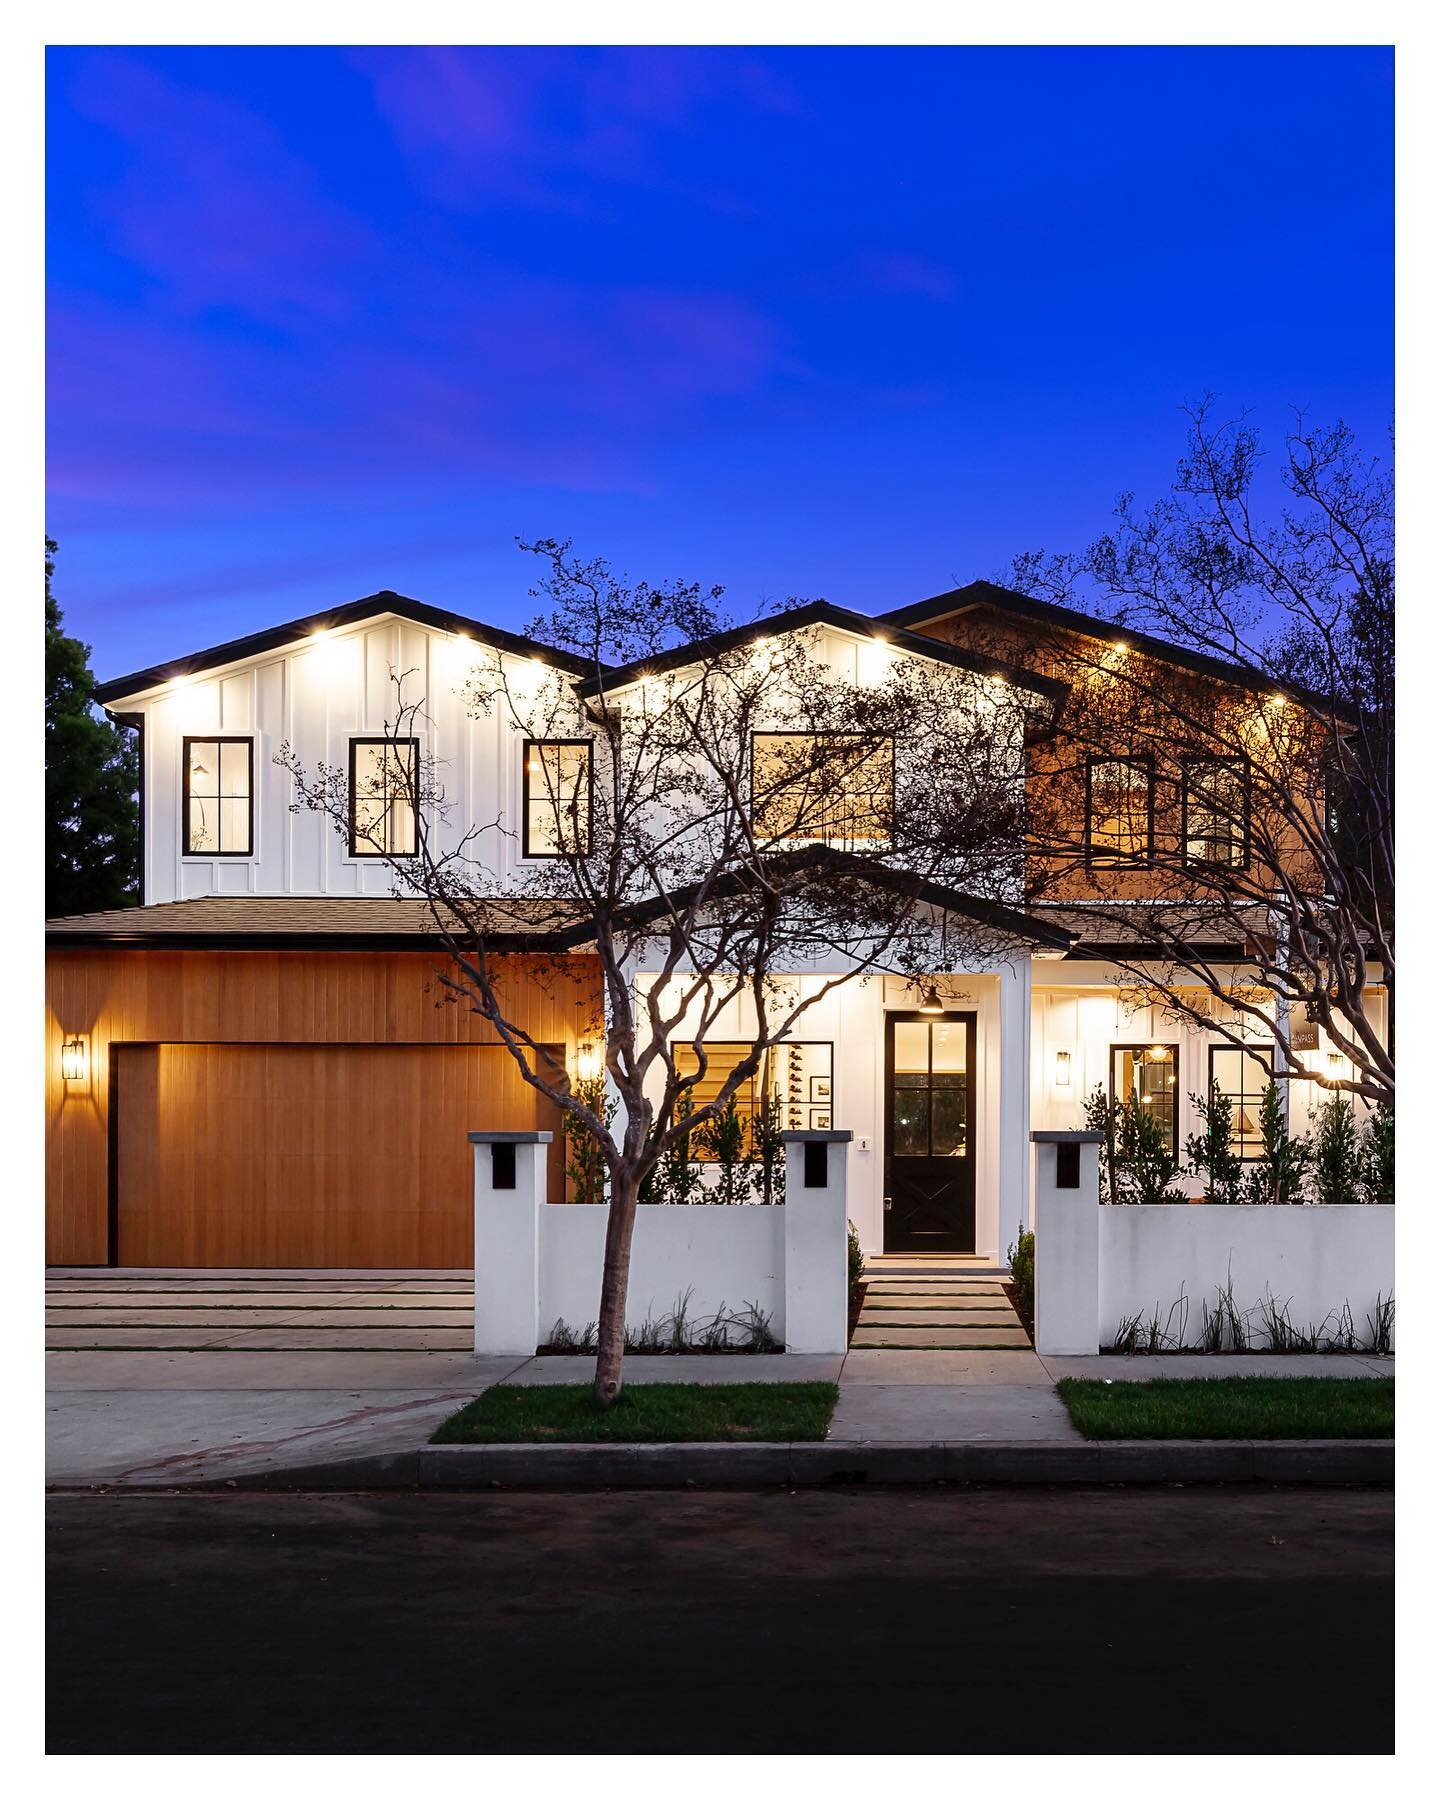 New modern farmhouse listing in Valley Village from @kobirealtor ! 

Looks like there is already a sale pending!

#modernfarmhouse #valleyvillage #losangeles #realestate #realestatela #smarthome #home #house #dreamhouse #luxury #luxurylifestyle #luxu